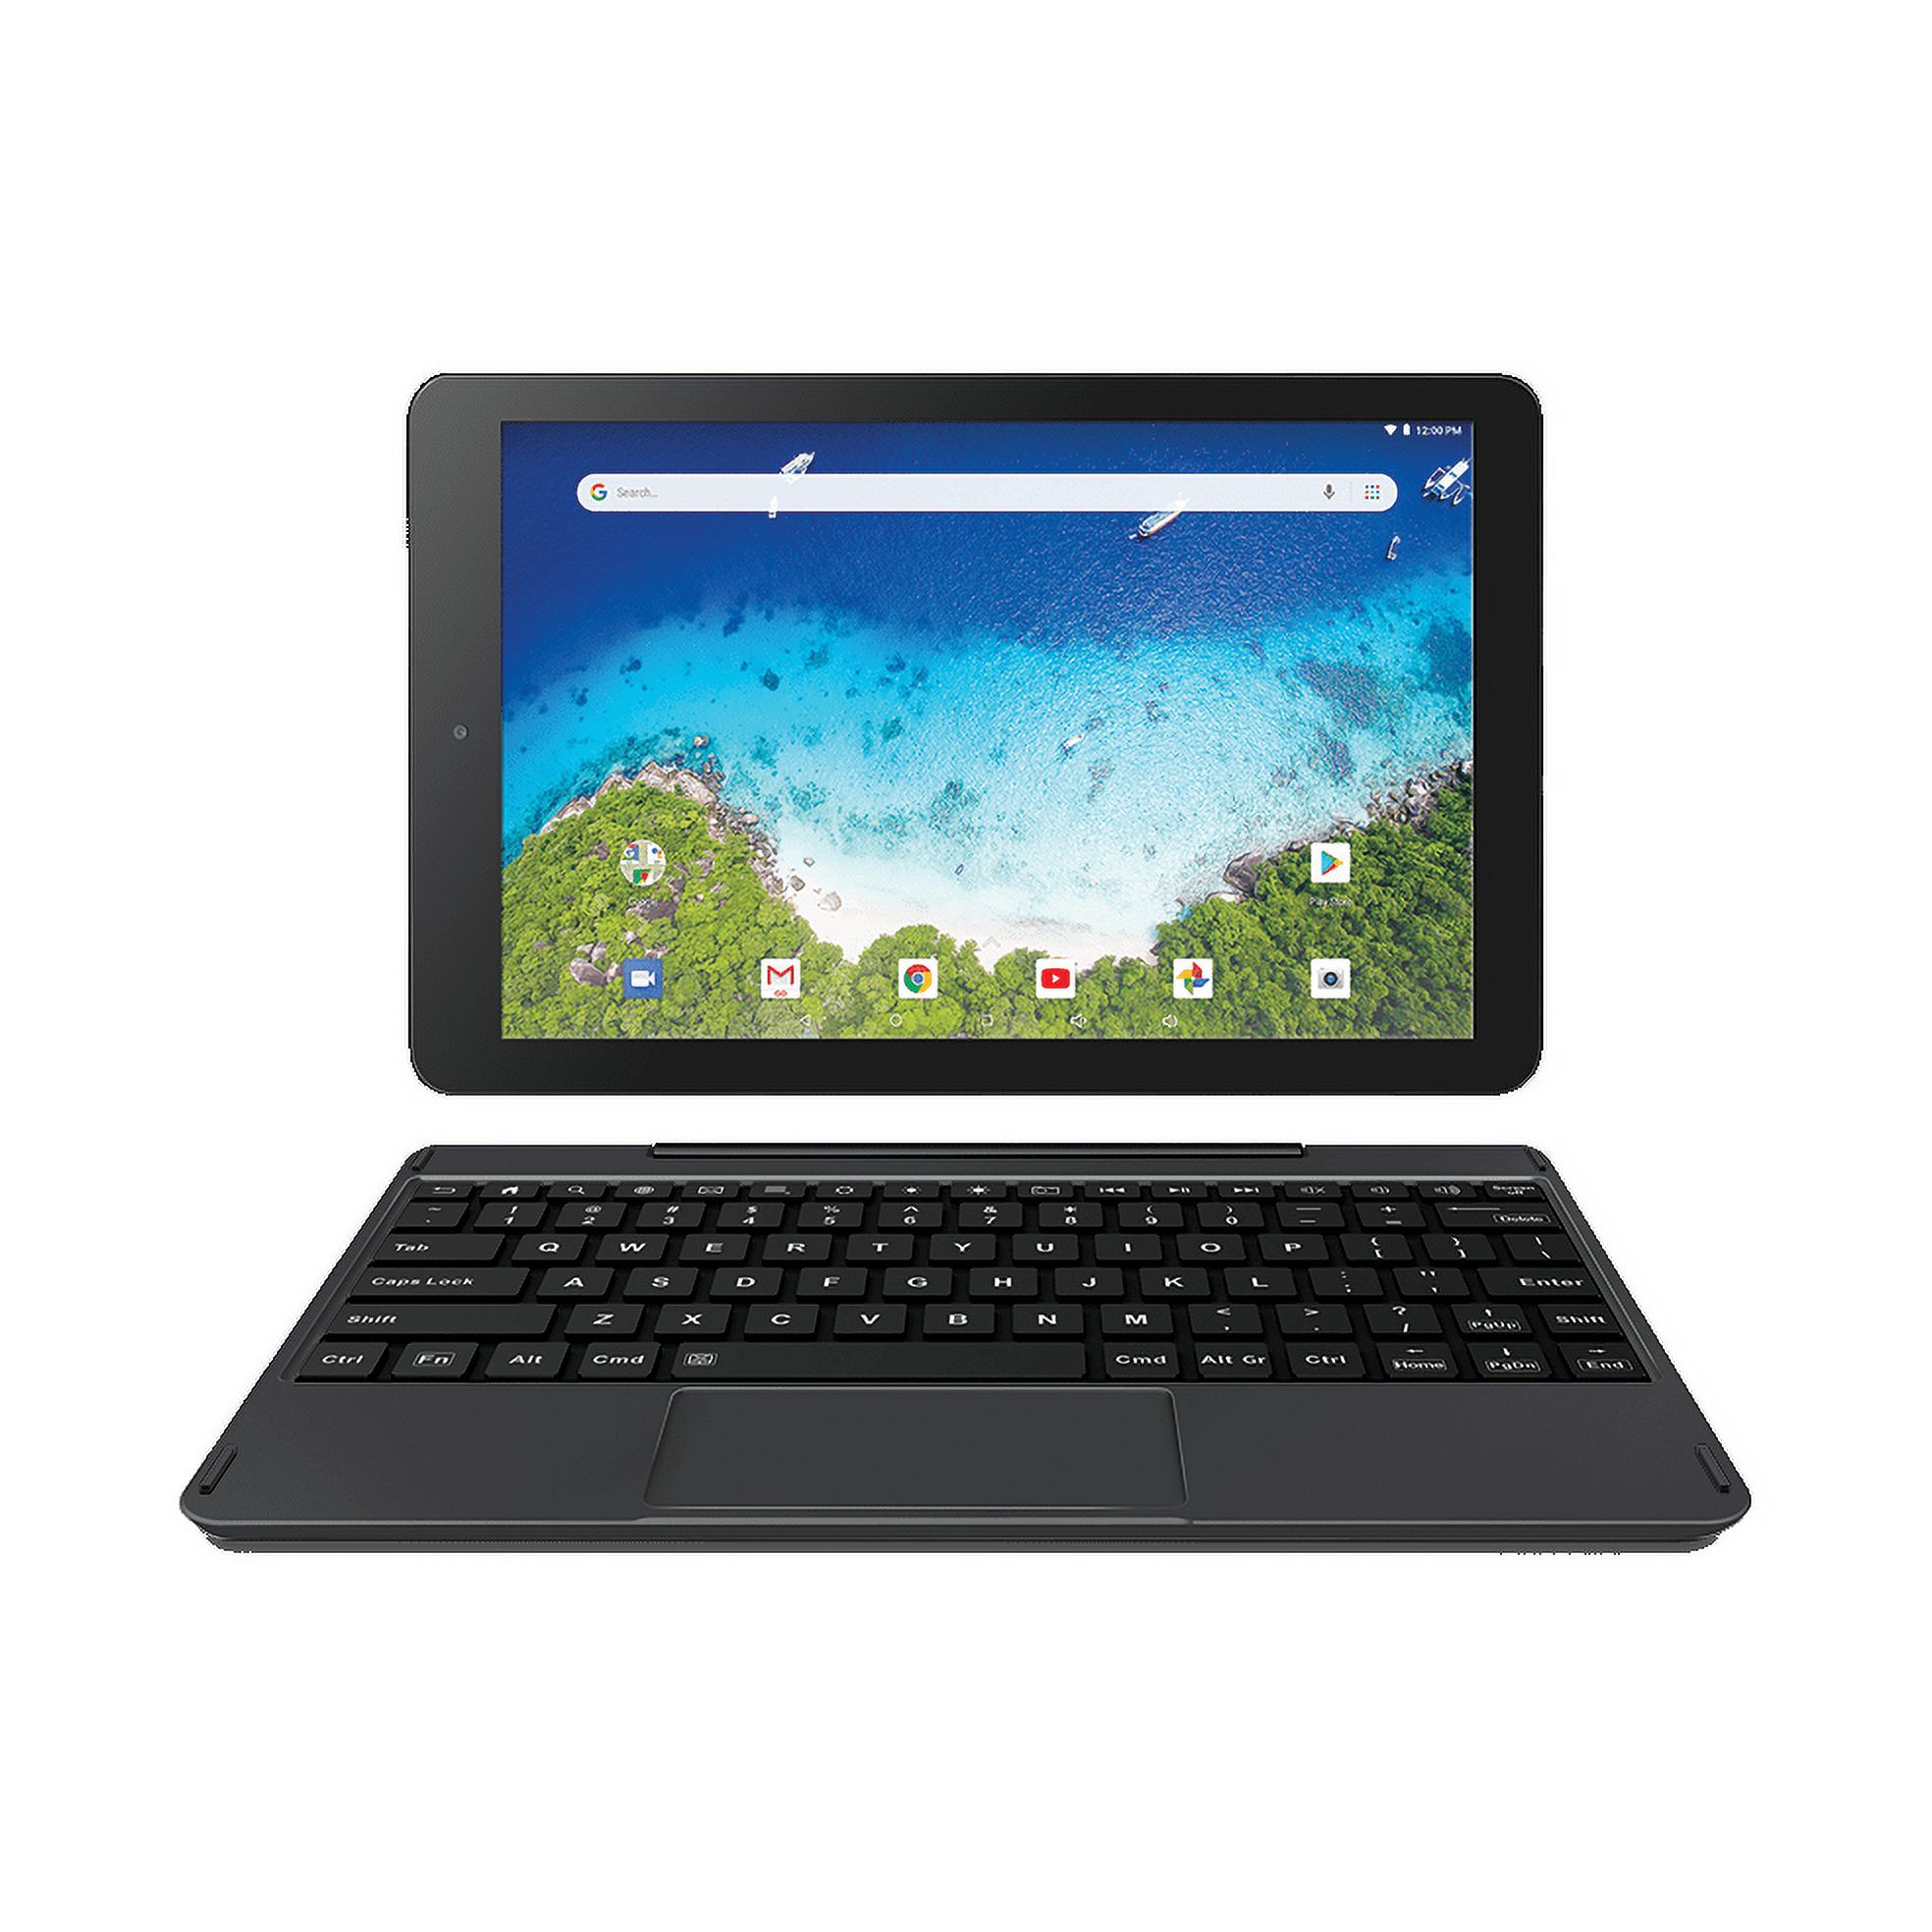 RCA Viking Pro 10.1" Android 2-in-1 Tablet 32GB Quad Core, Charcoal (Google Classroom Ready) - image 4 of 4